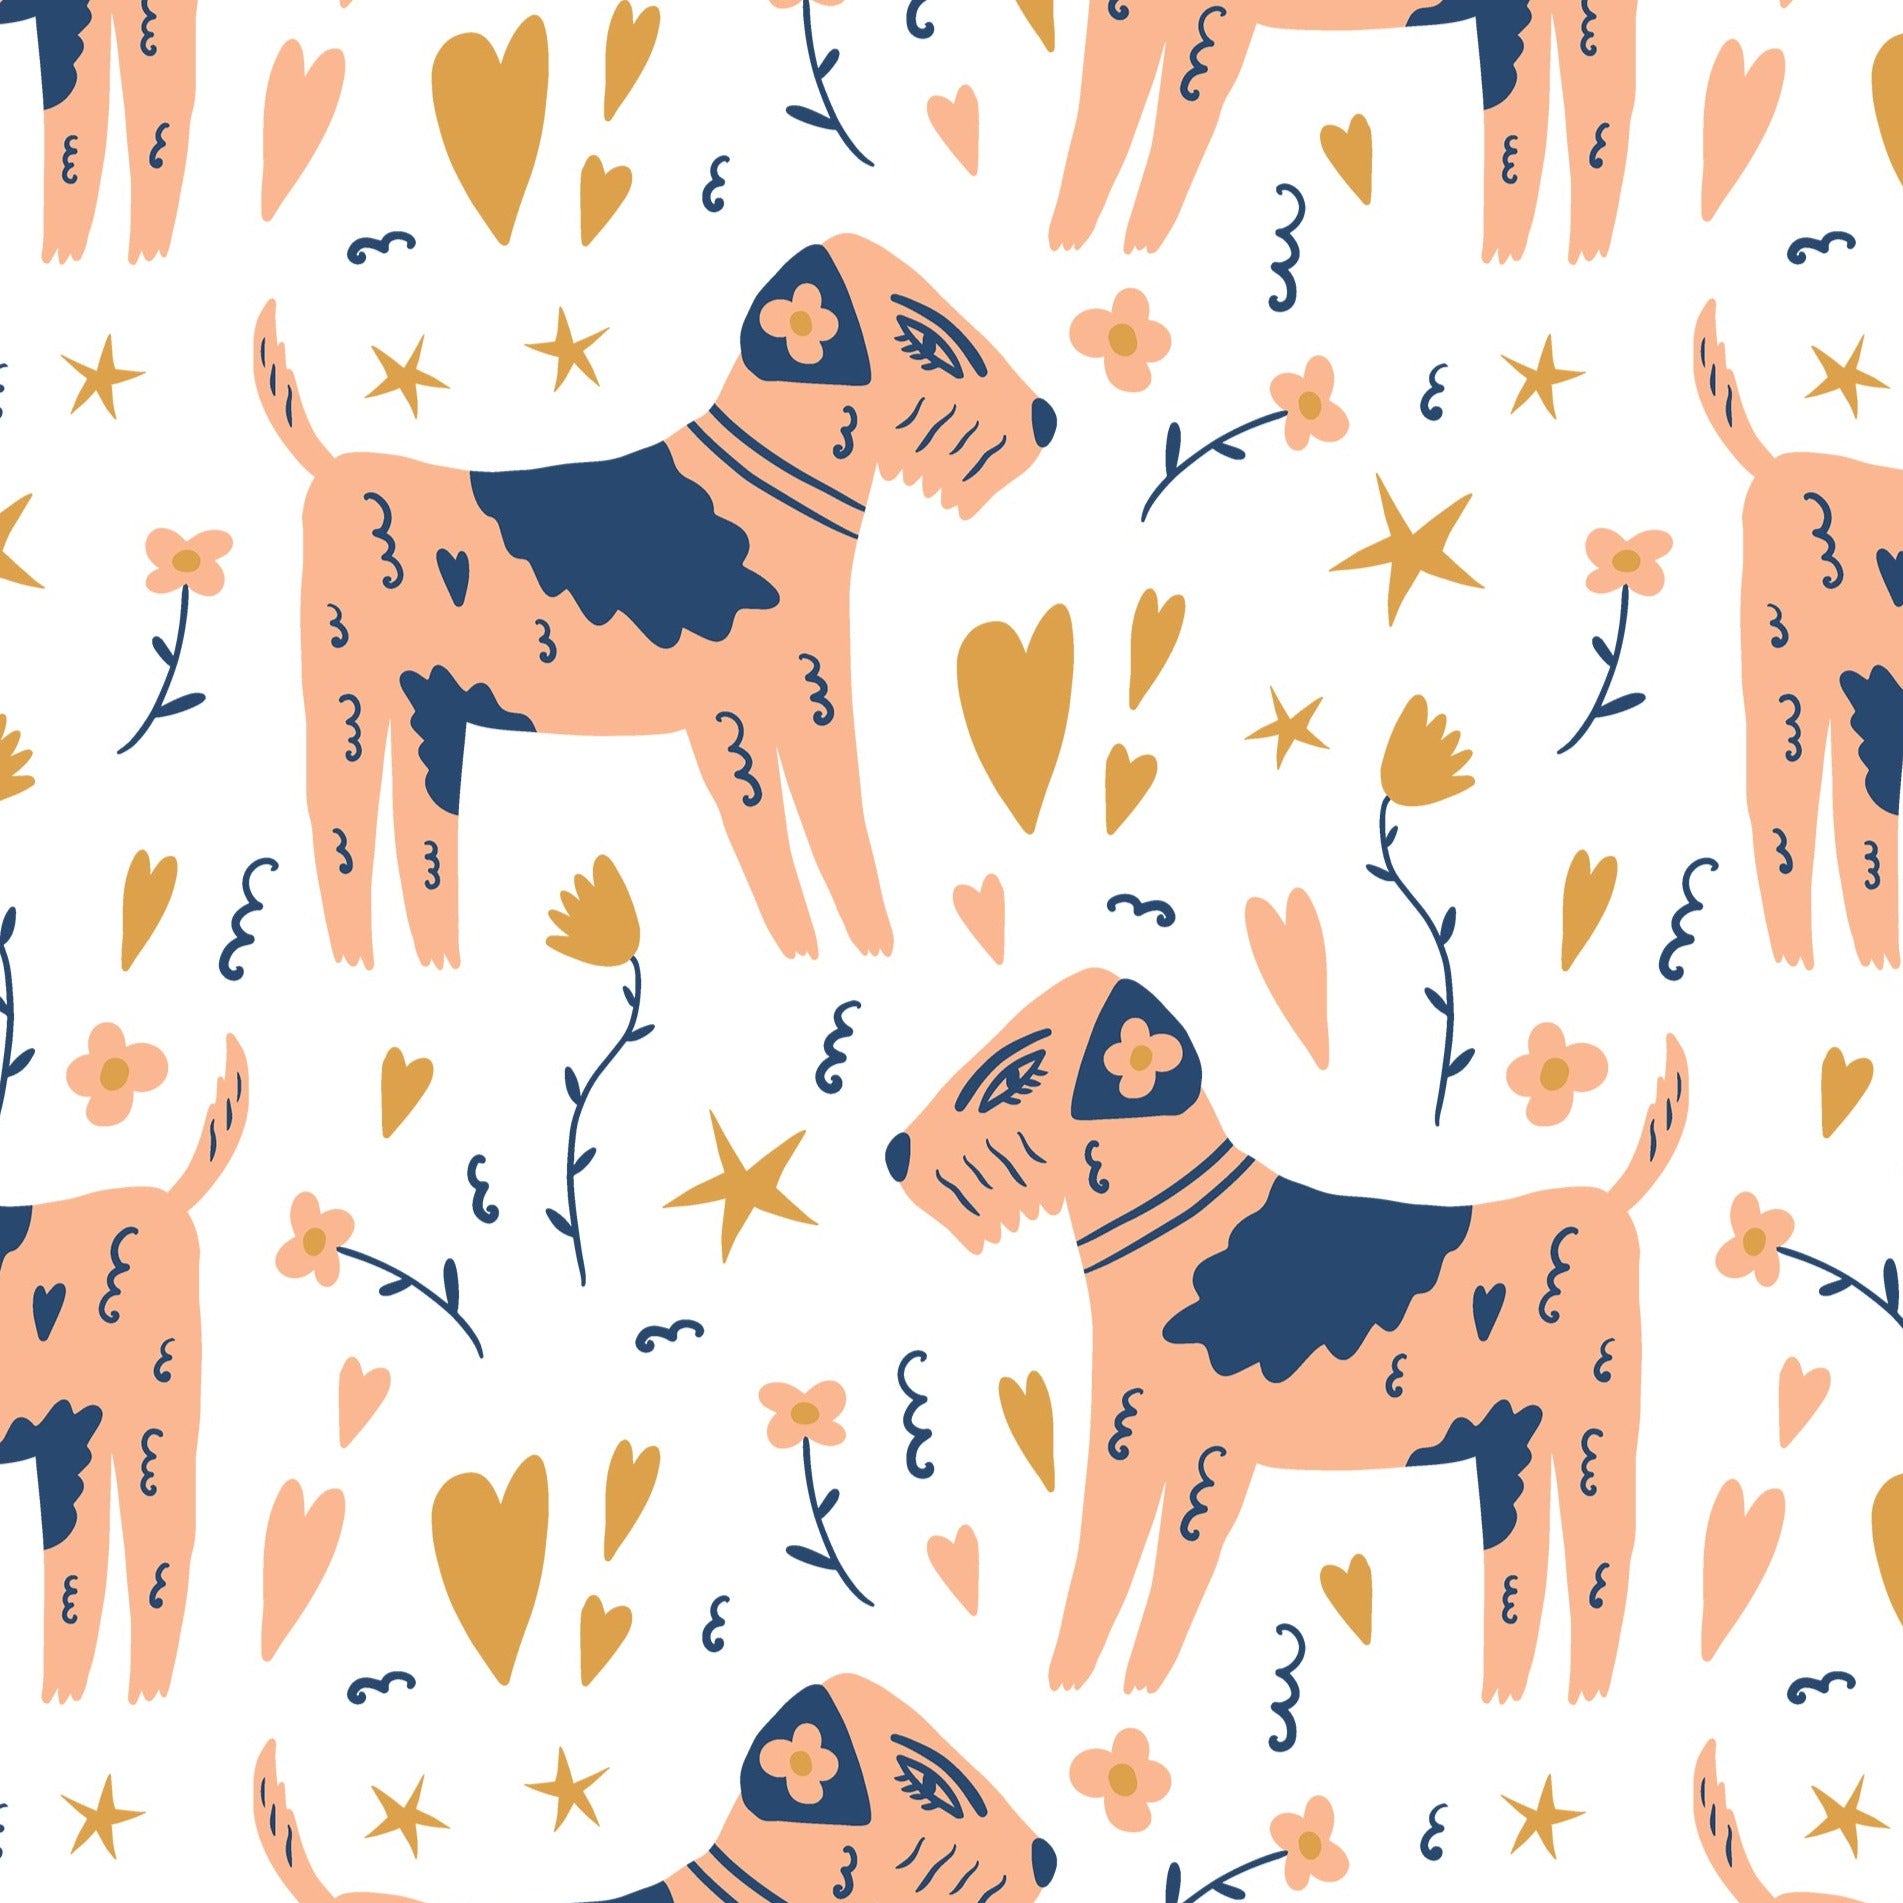 Artistic and playful wallpaper pattern from 'Dog Wallpaper 38' featuring peach-colored dogs surrounded by whimsical floral and celestial elements on a white background. The vibrant stars, hearts, and botanical motifs add a magical touch, perfect for any child's room or creative space.